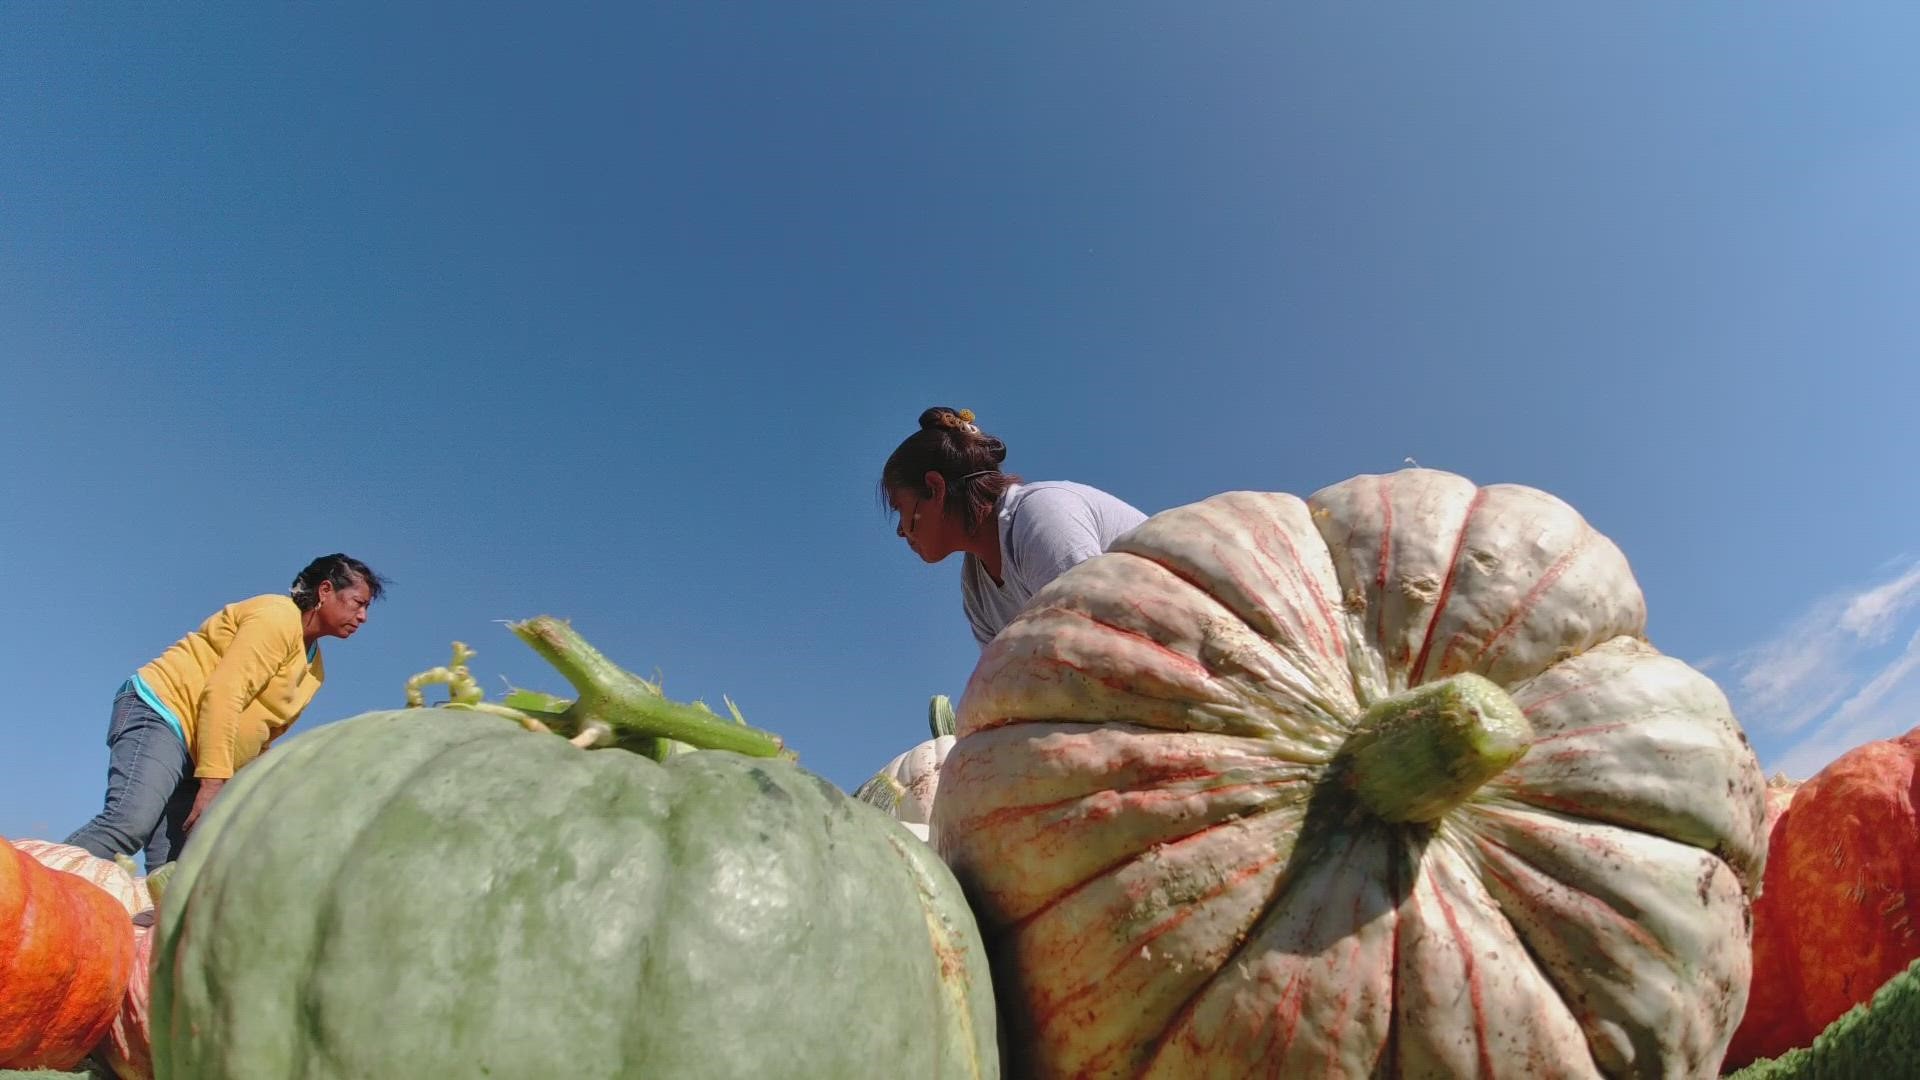 Assiter Punkin Ranch and Pumpkin Patch in Floydada, Texas has all the pumpkins you need for the Halloween season.